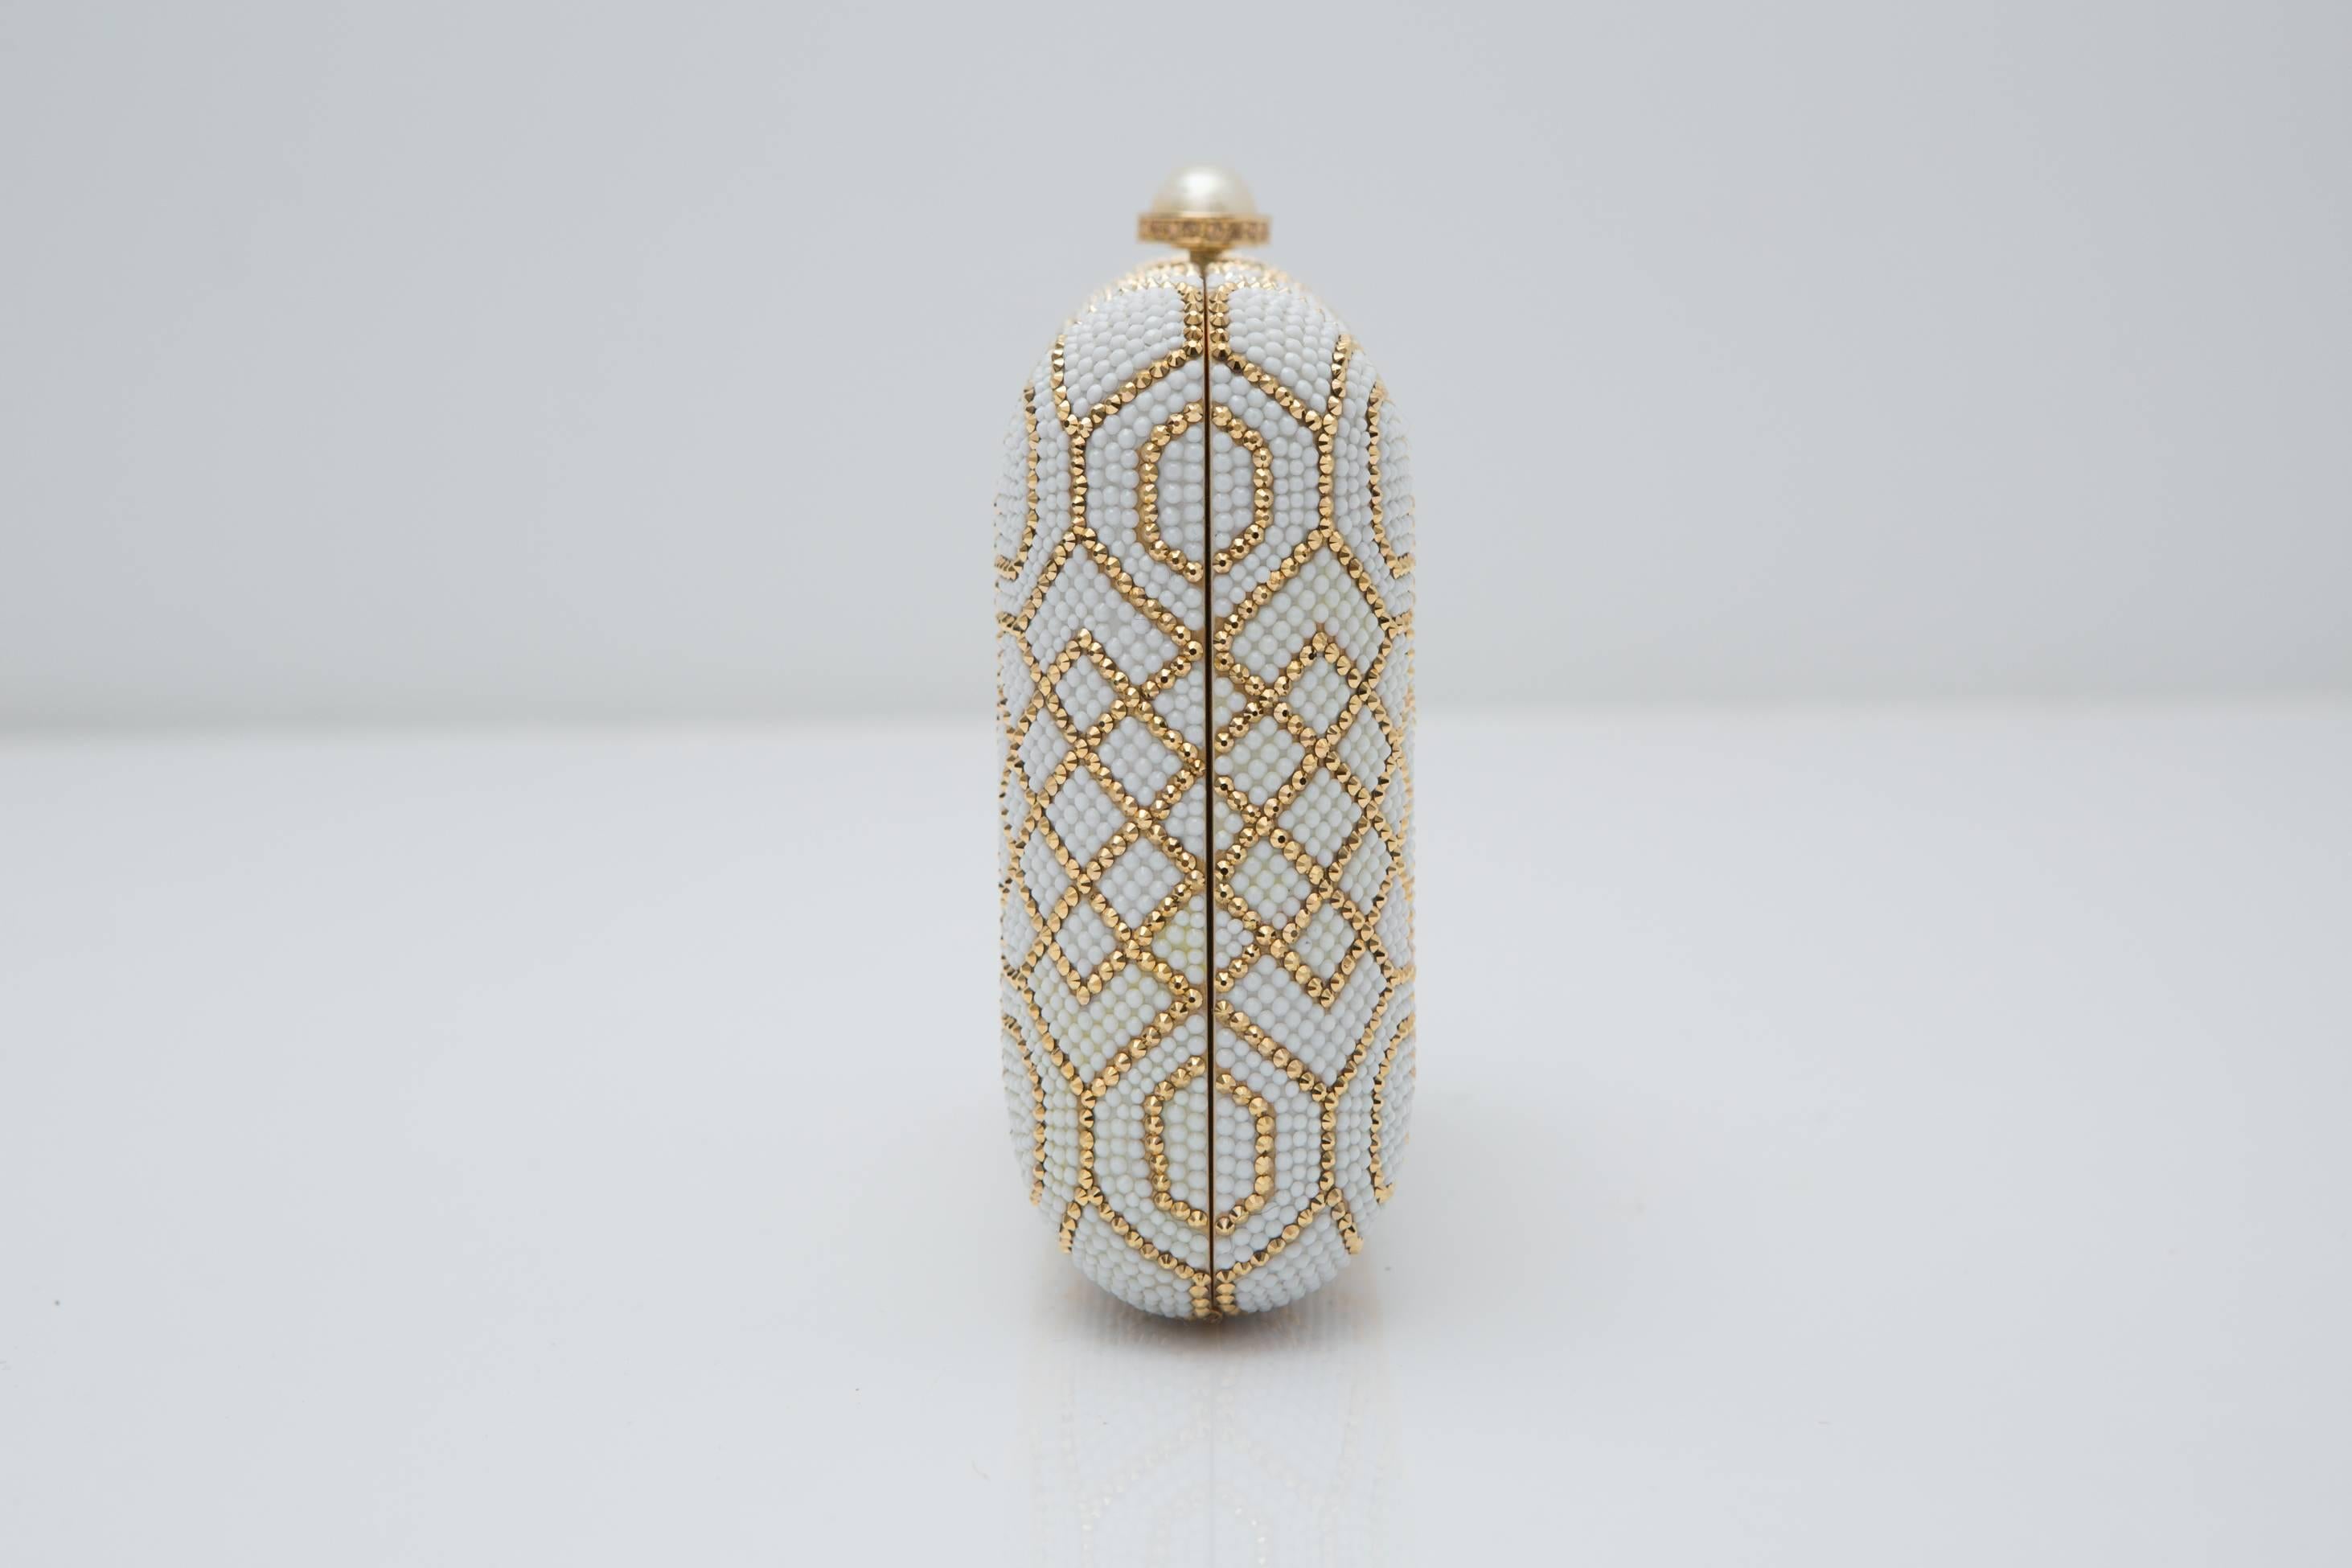 Ivory and gold patterned clutch, with pearl button closure detail.